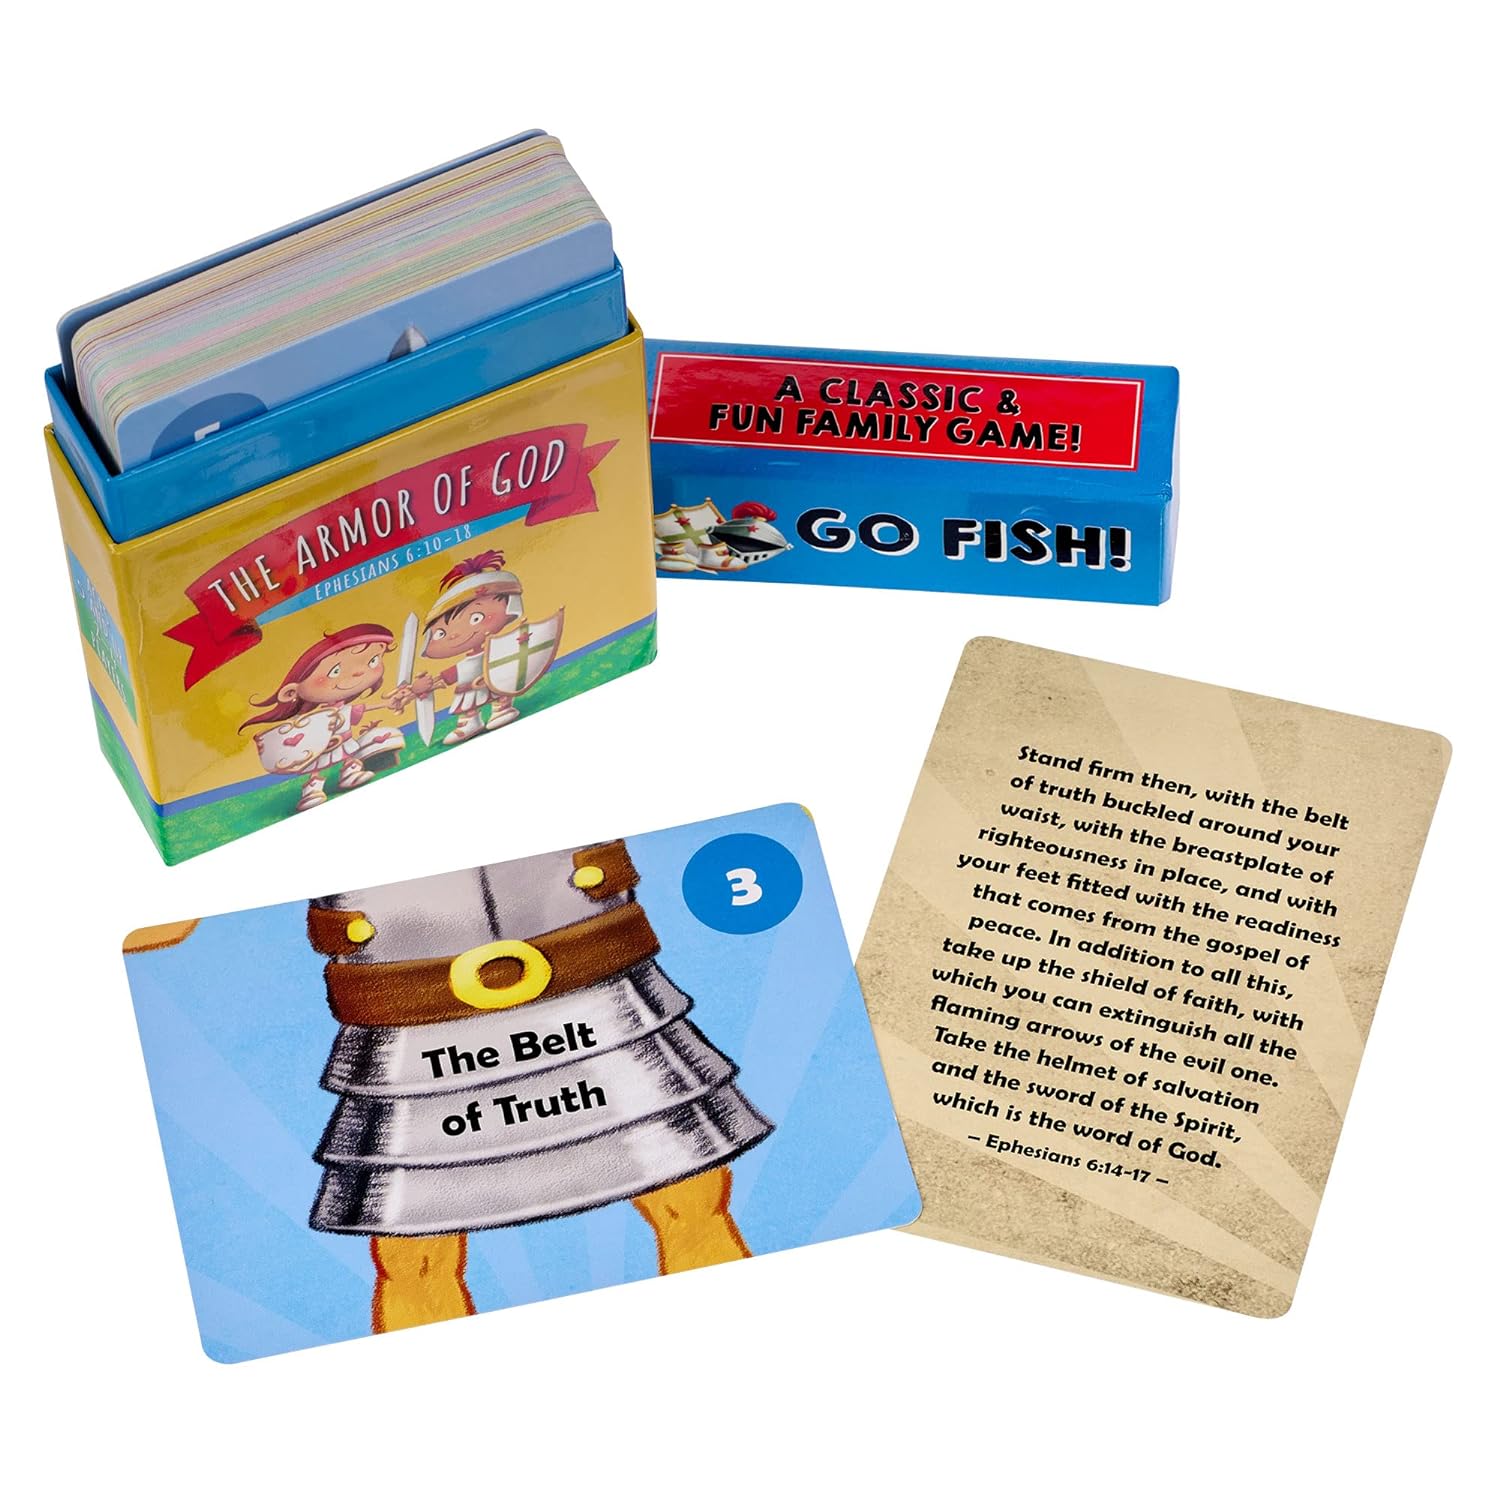 Go Fish! The Armor of God Card Game, 48 Double-Sided Cards, Ages 5-8 Christian Game claimedbygoddesigns